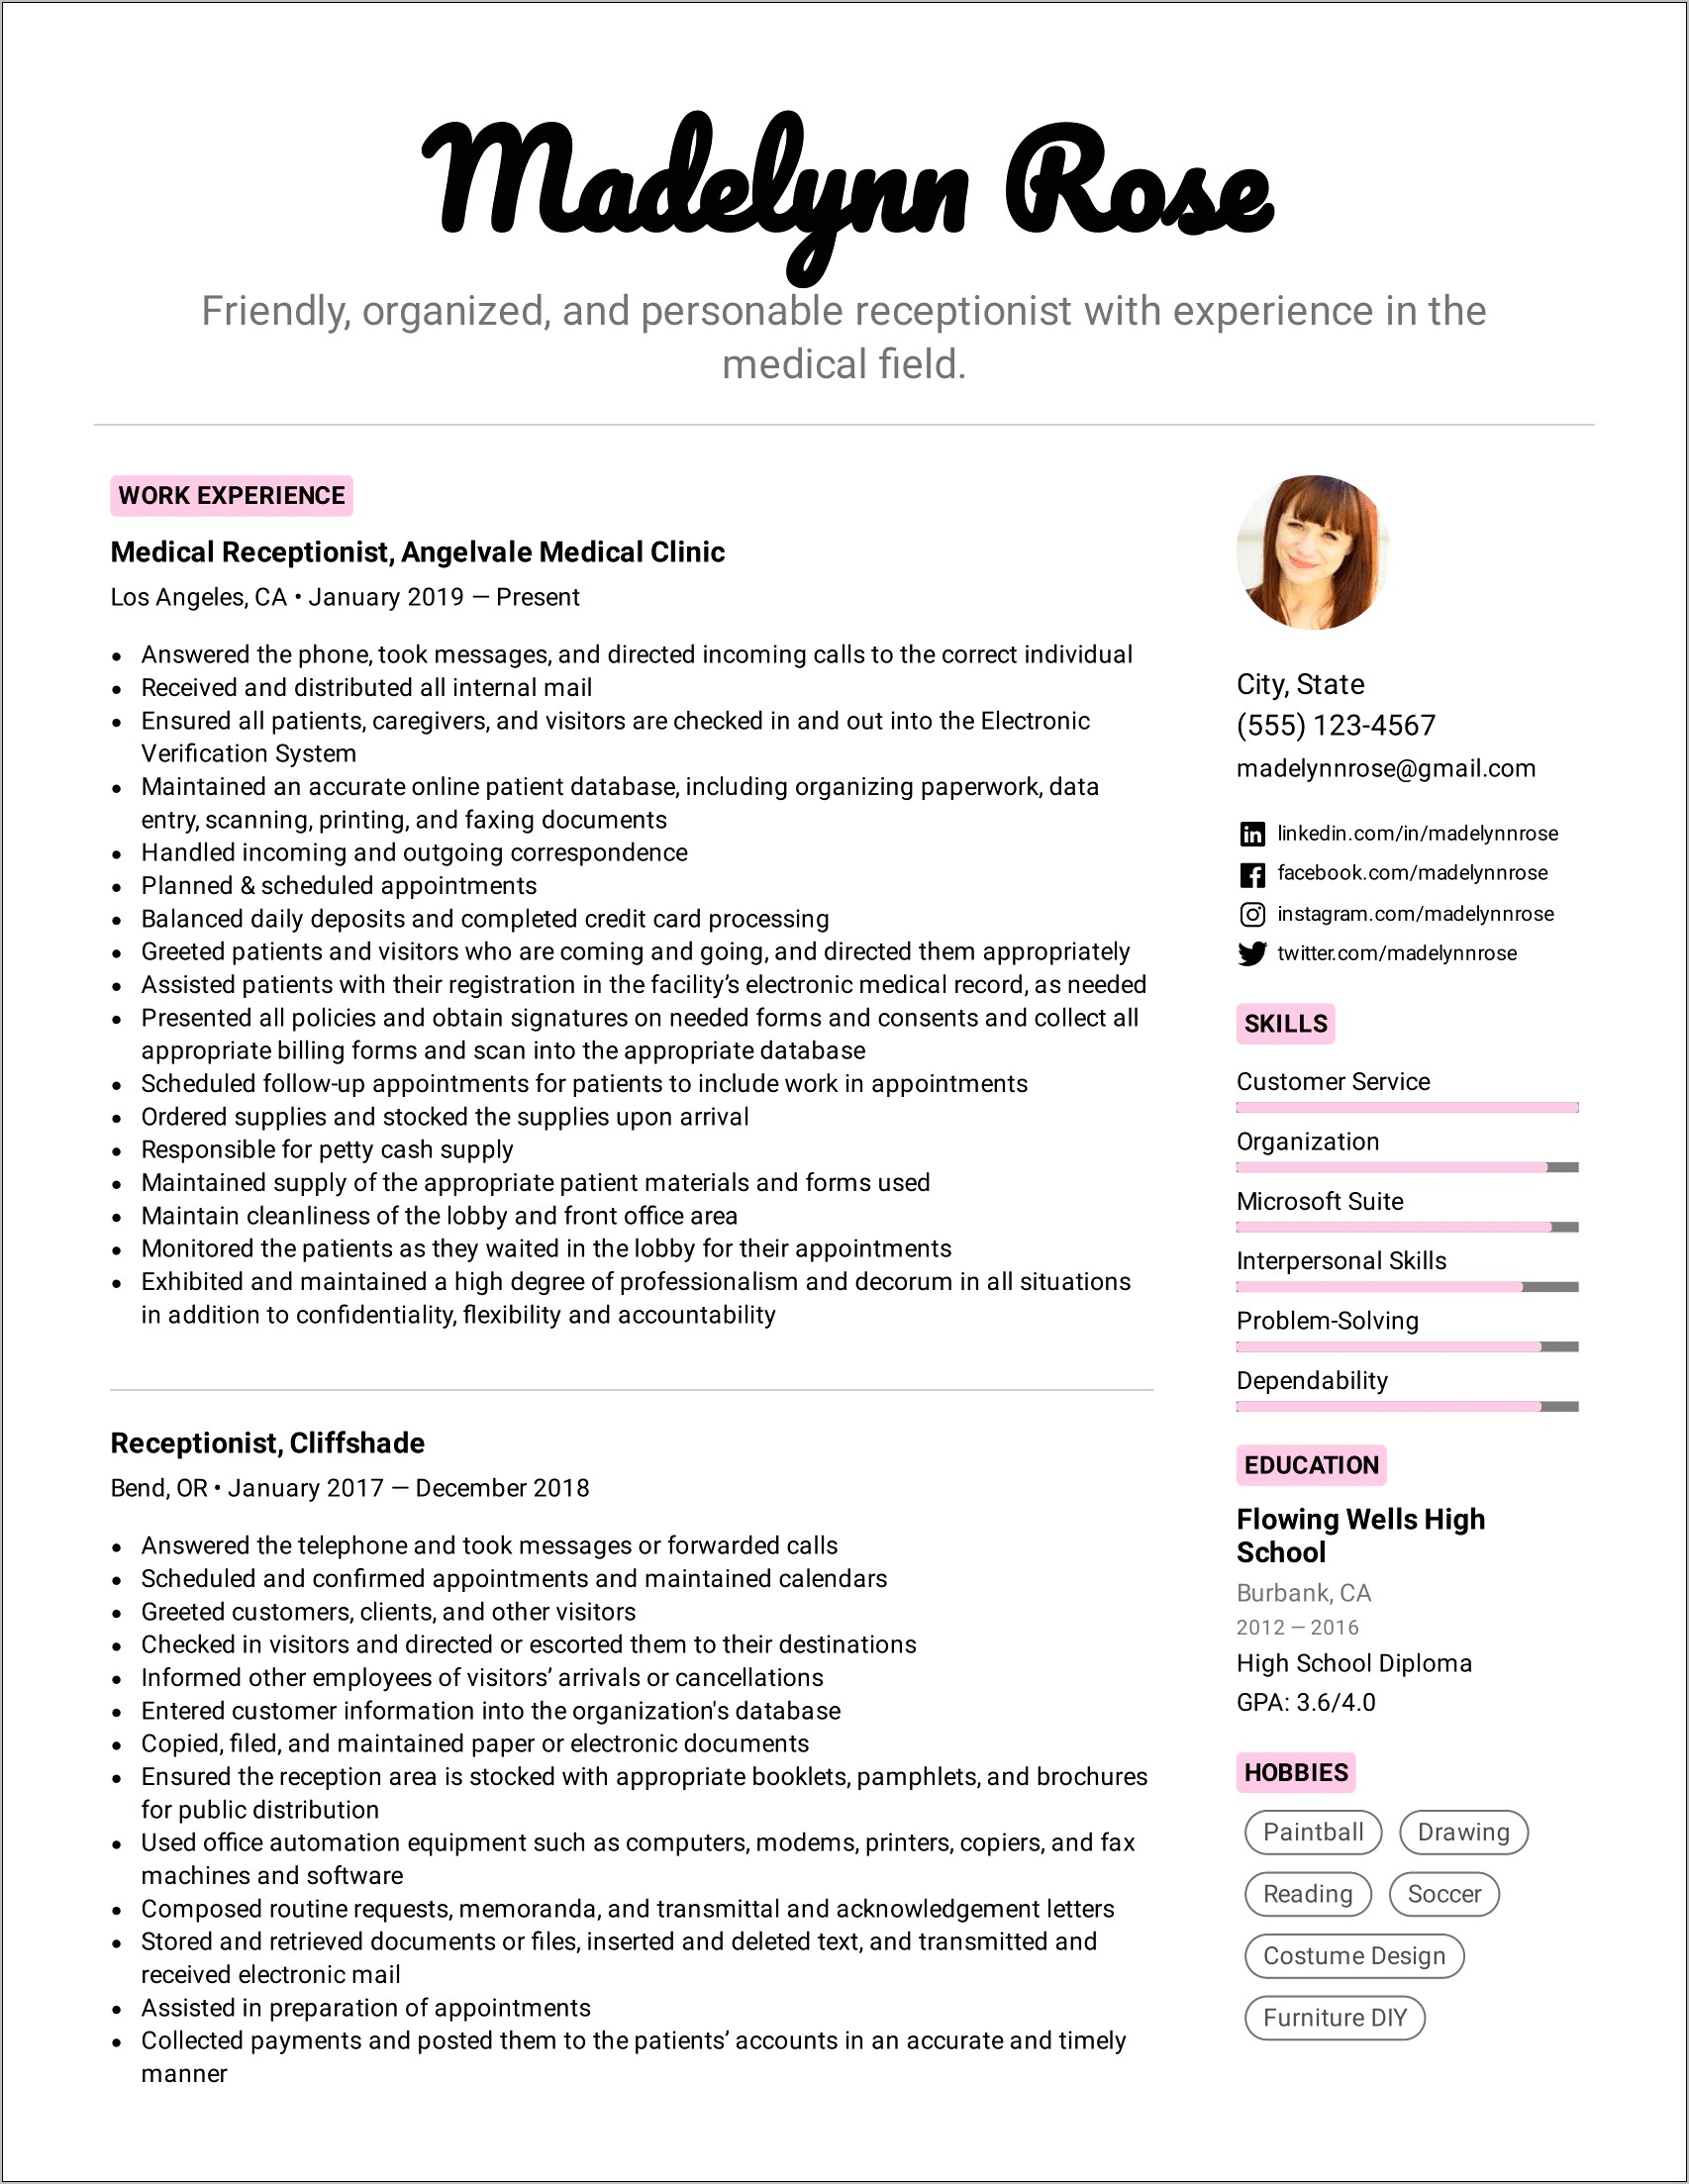 Resume Description Examples To Be A Receptionist